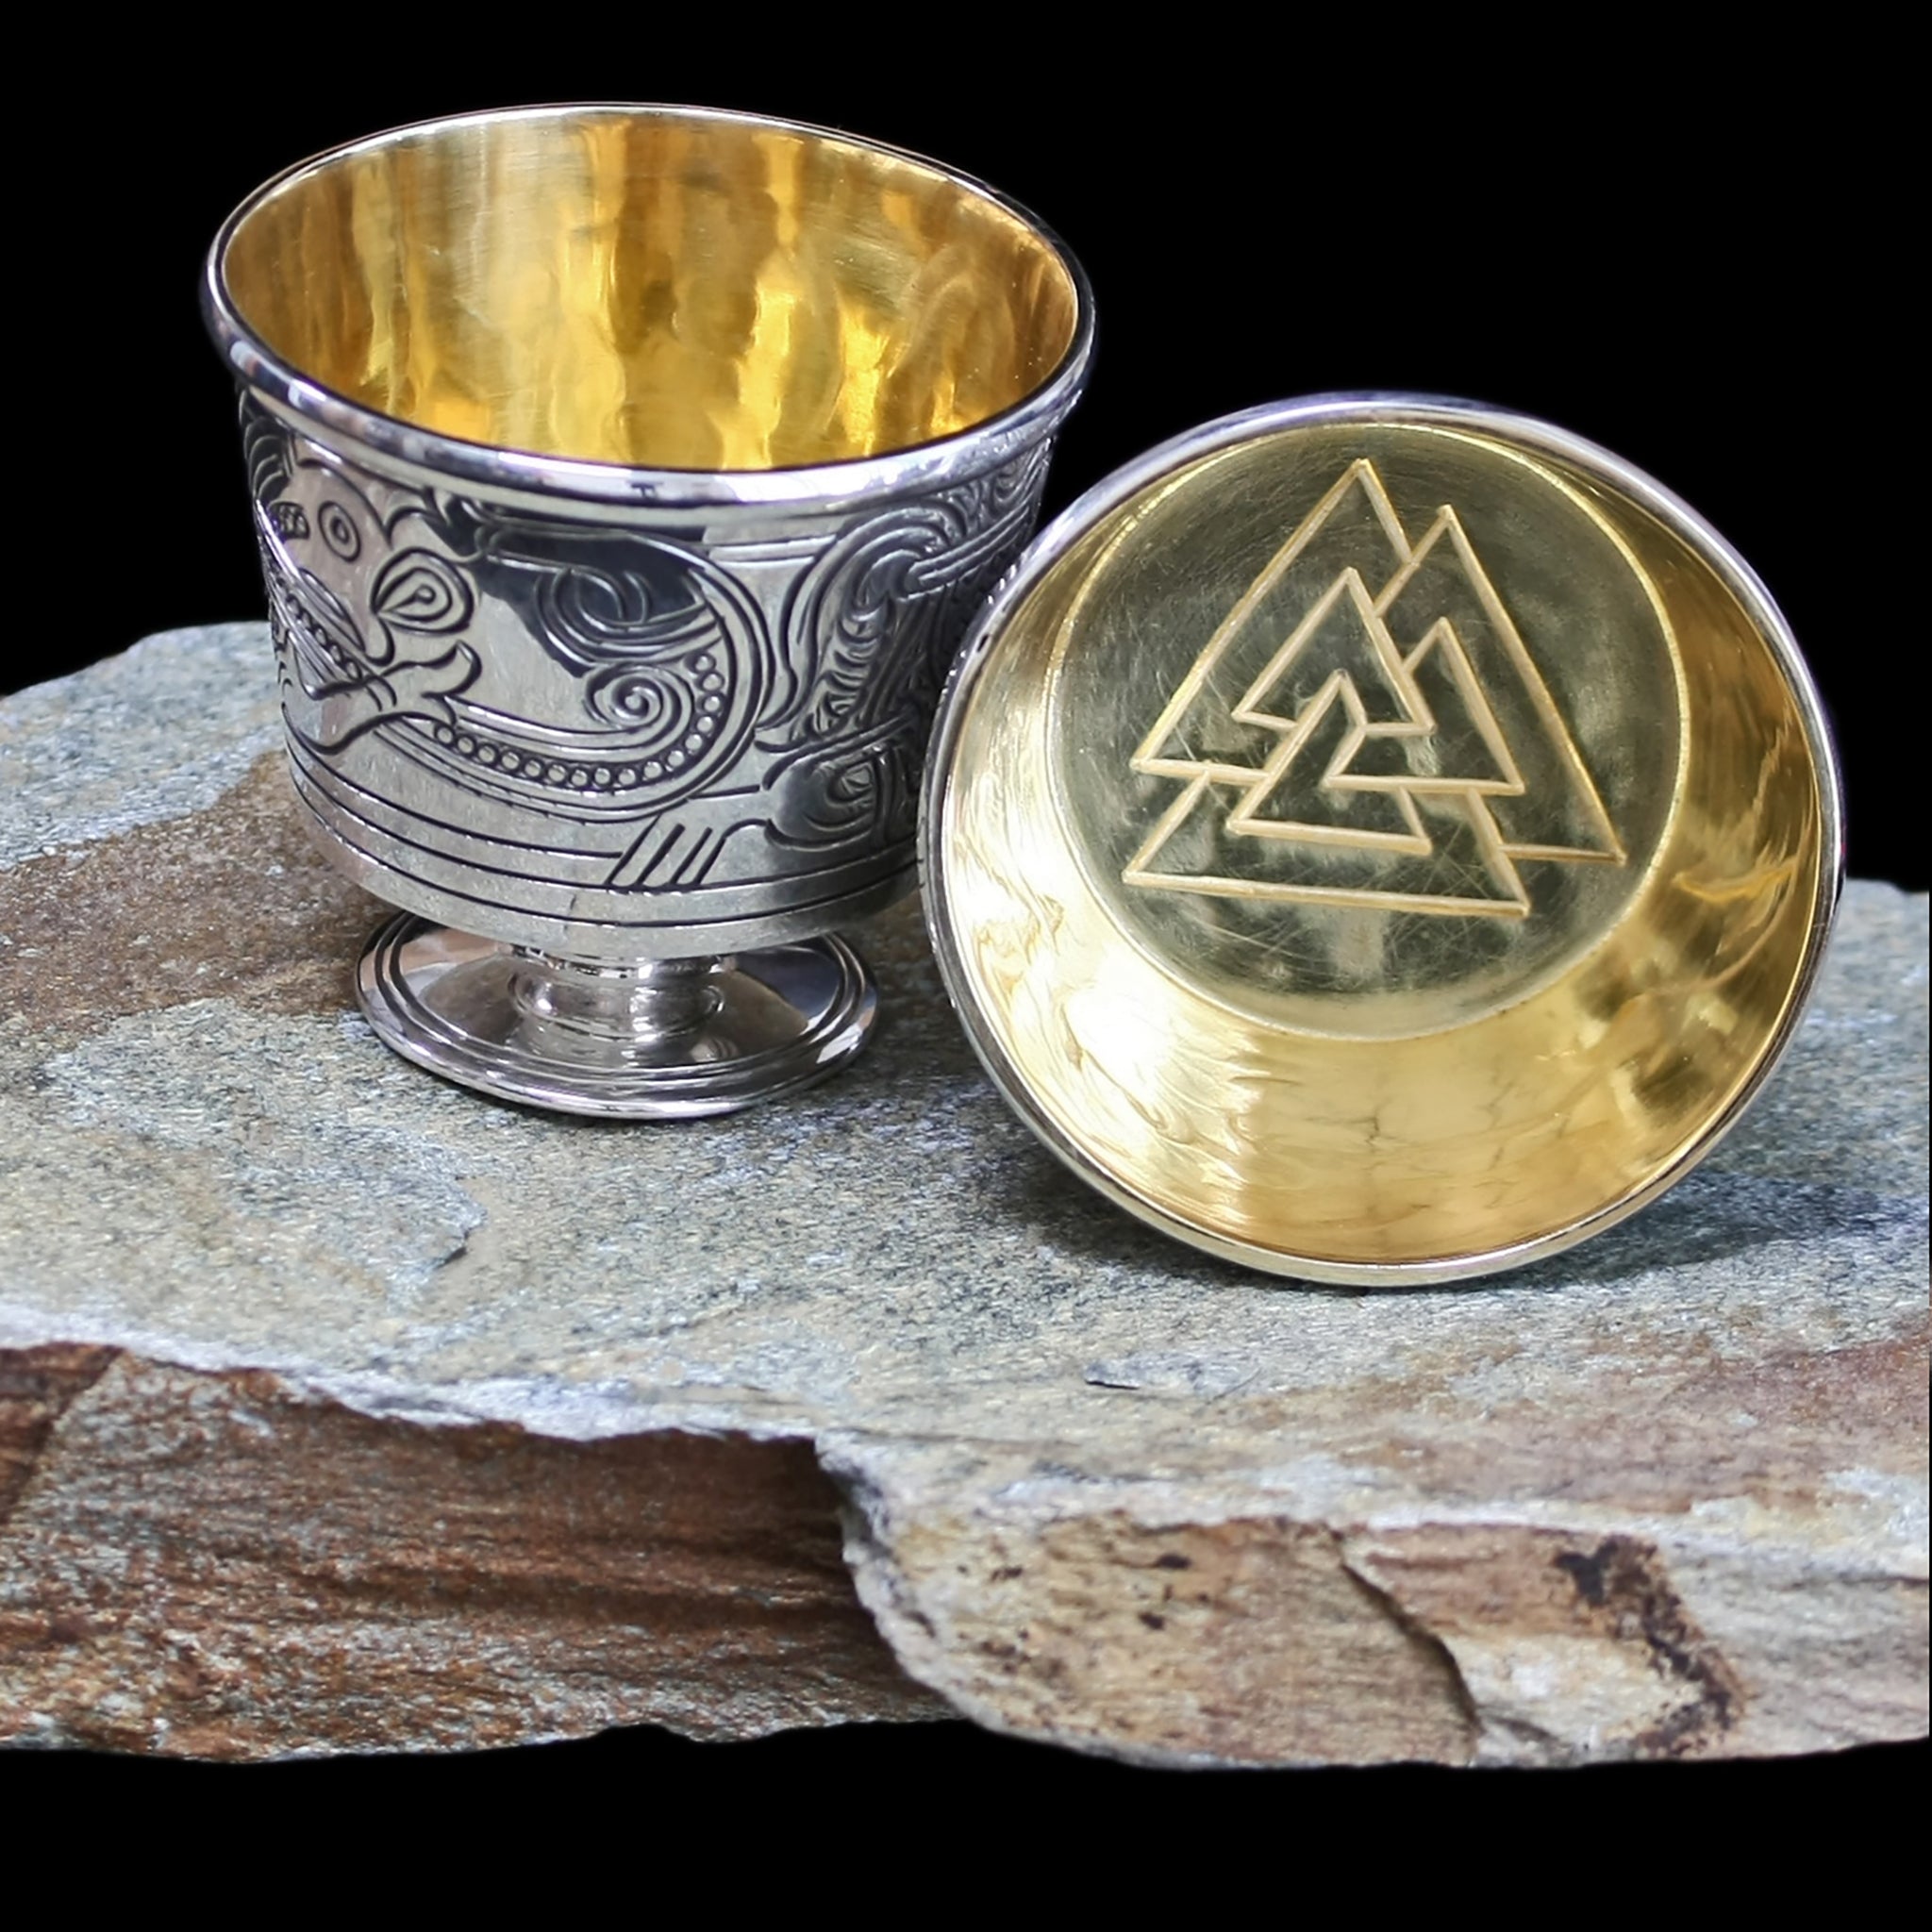 Handmade Silver and Gold Replica Jelling Cups with Valknut Design